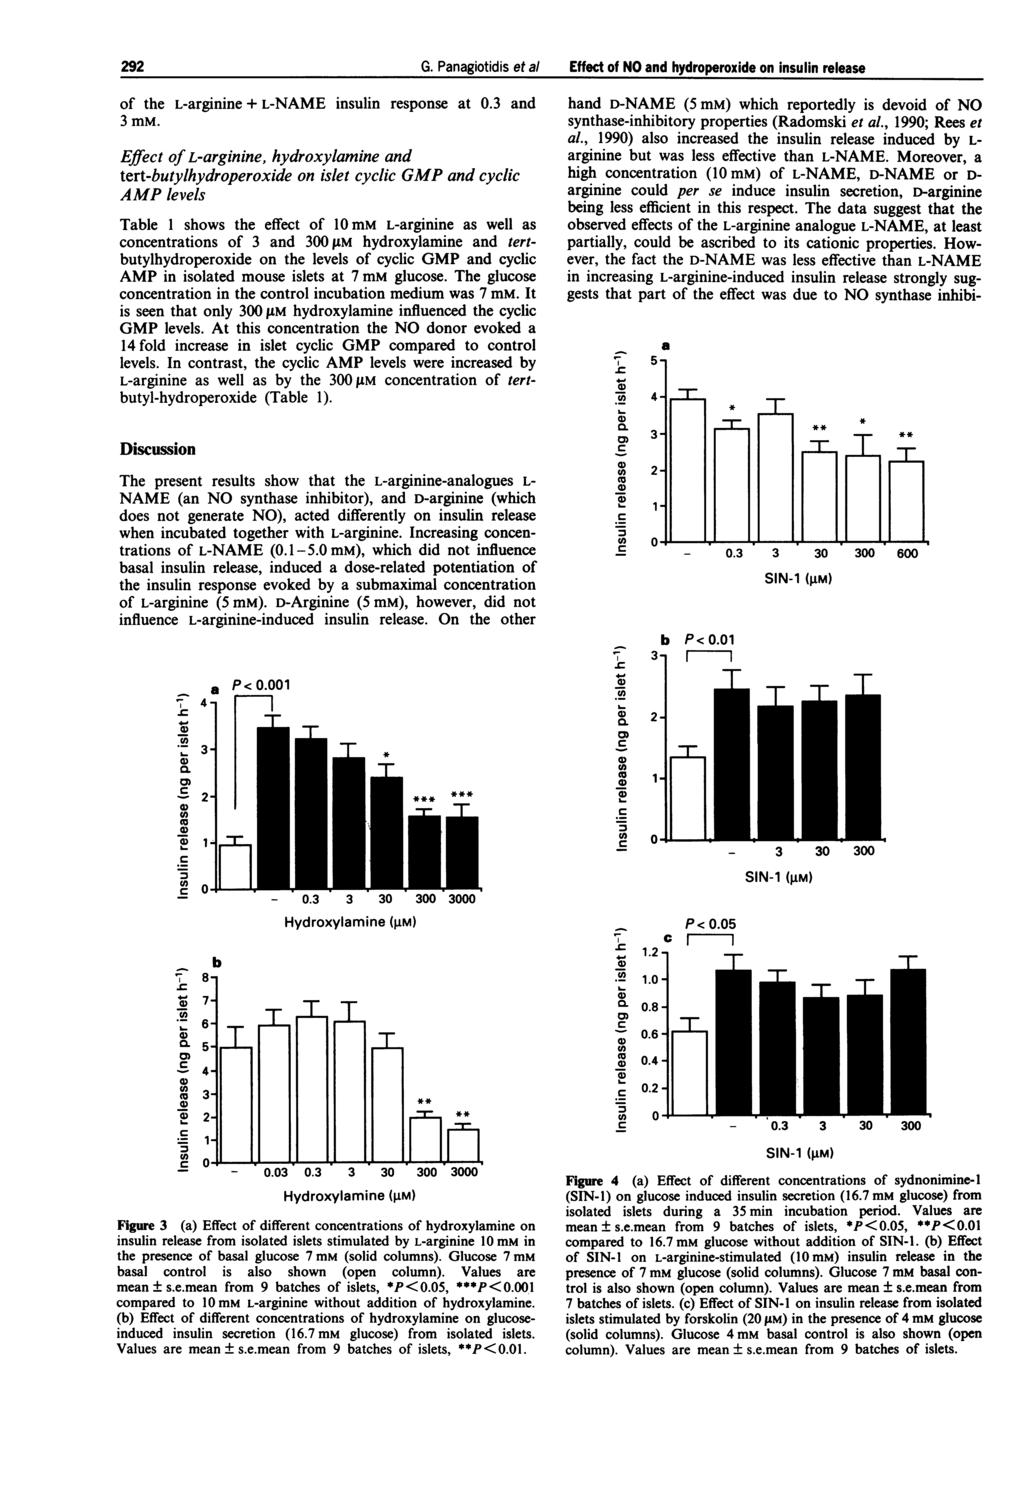 292 G. Panagiotidis et a/ Effet of NO and hydroperoxide on insulin release of the L-arginine + L-NAME insulin response at.3 and 3 mm.